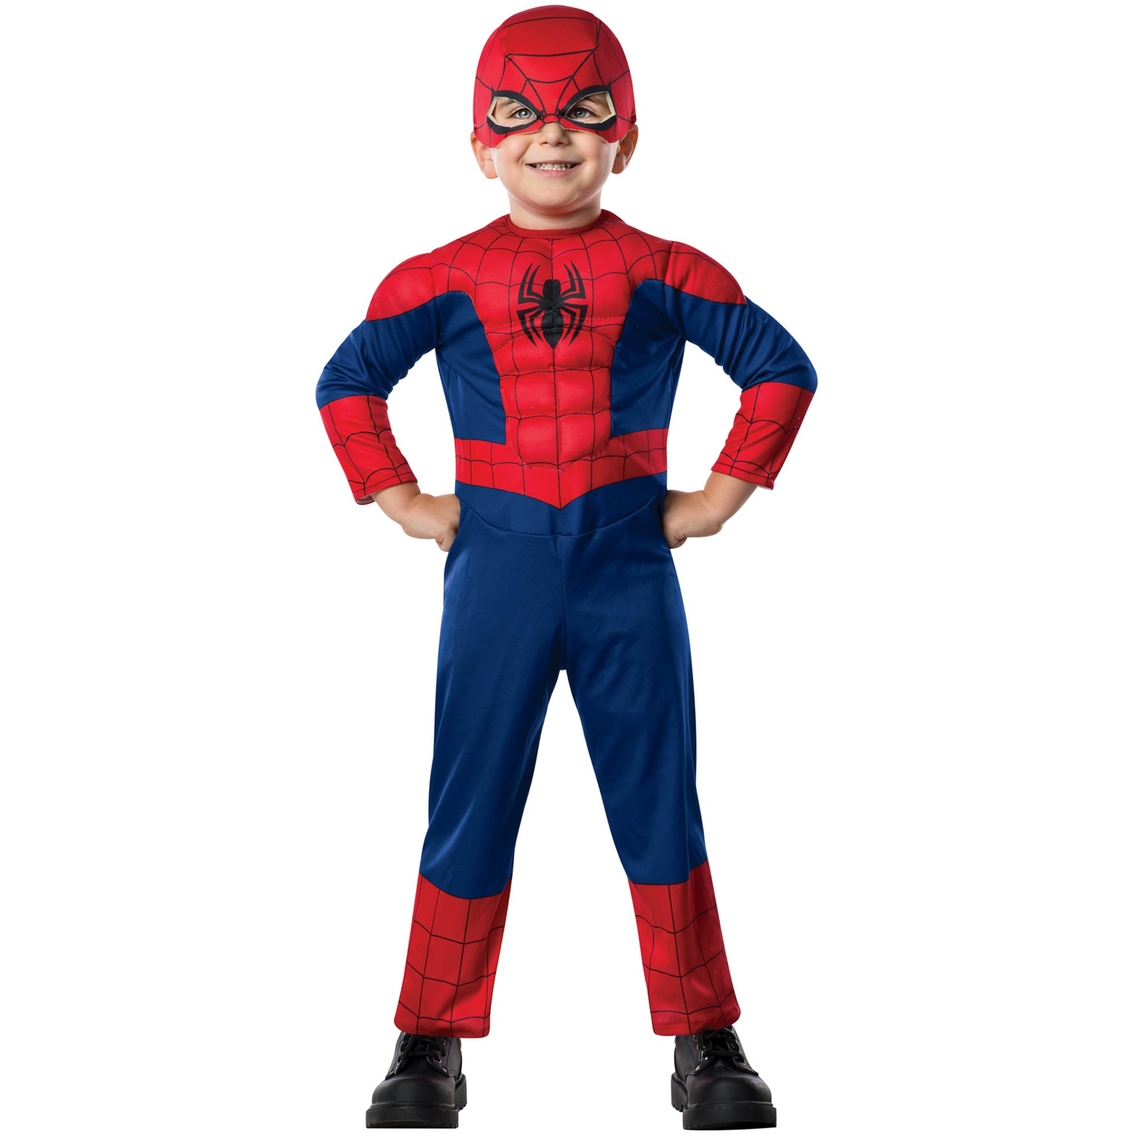 Details about   Spider Man ~ Complete Halloween Toddler Costume Rubies Marvel ~ 2T RA33 